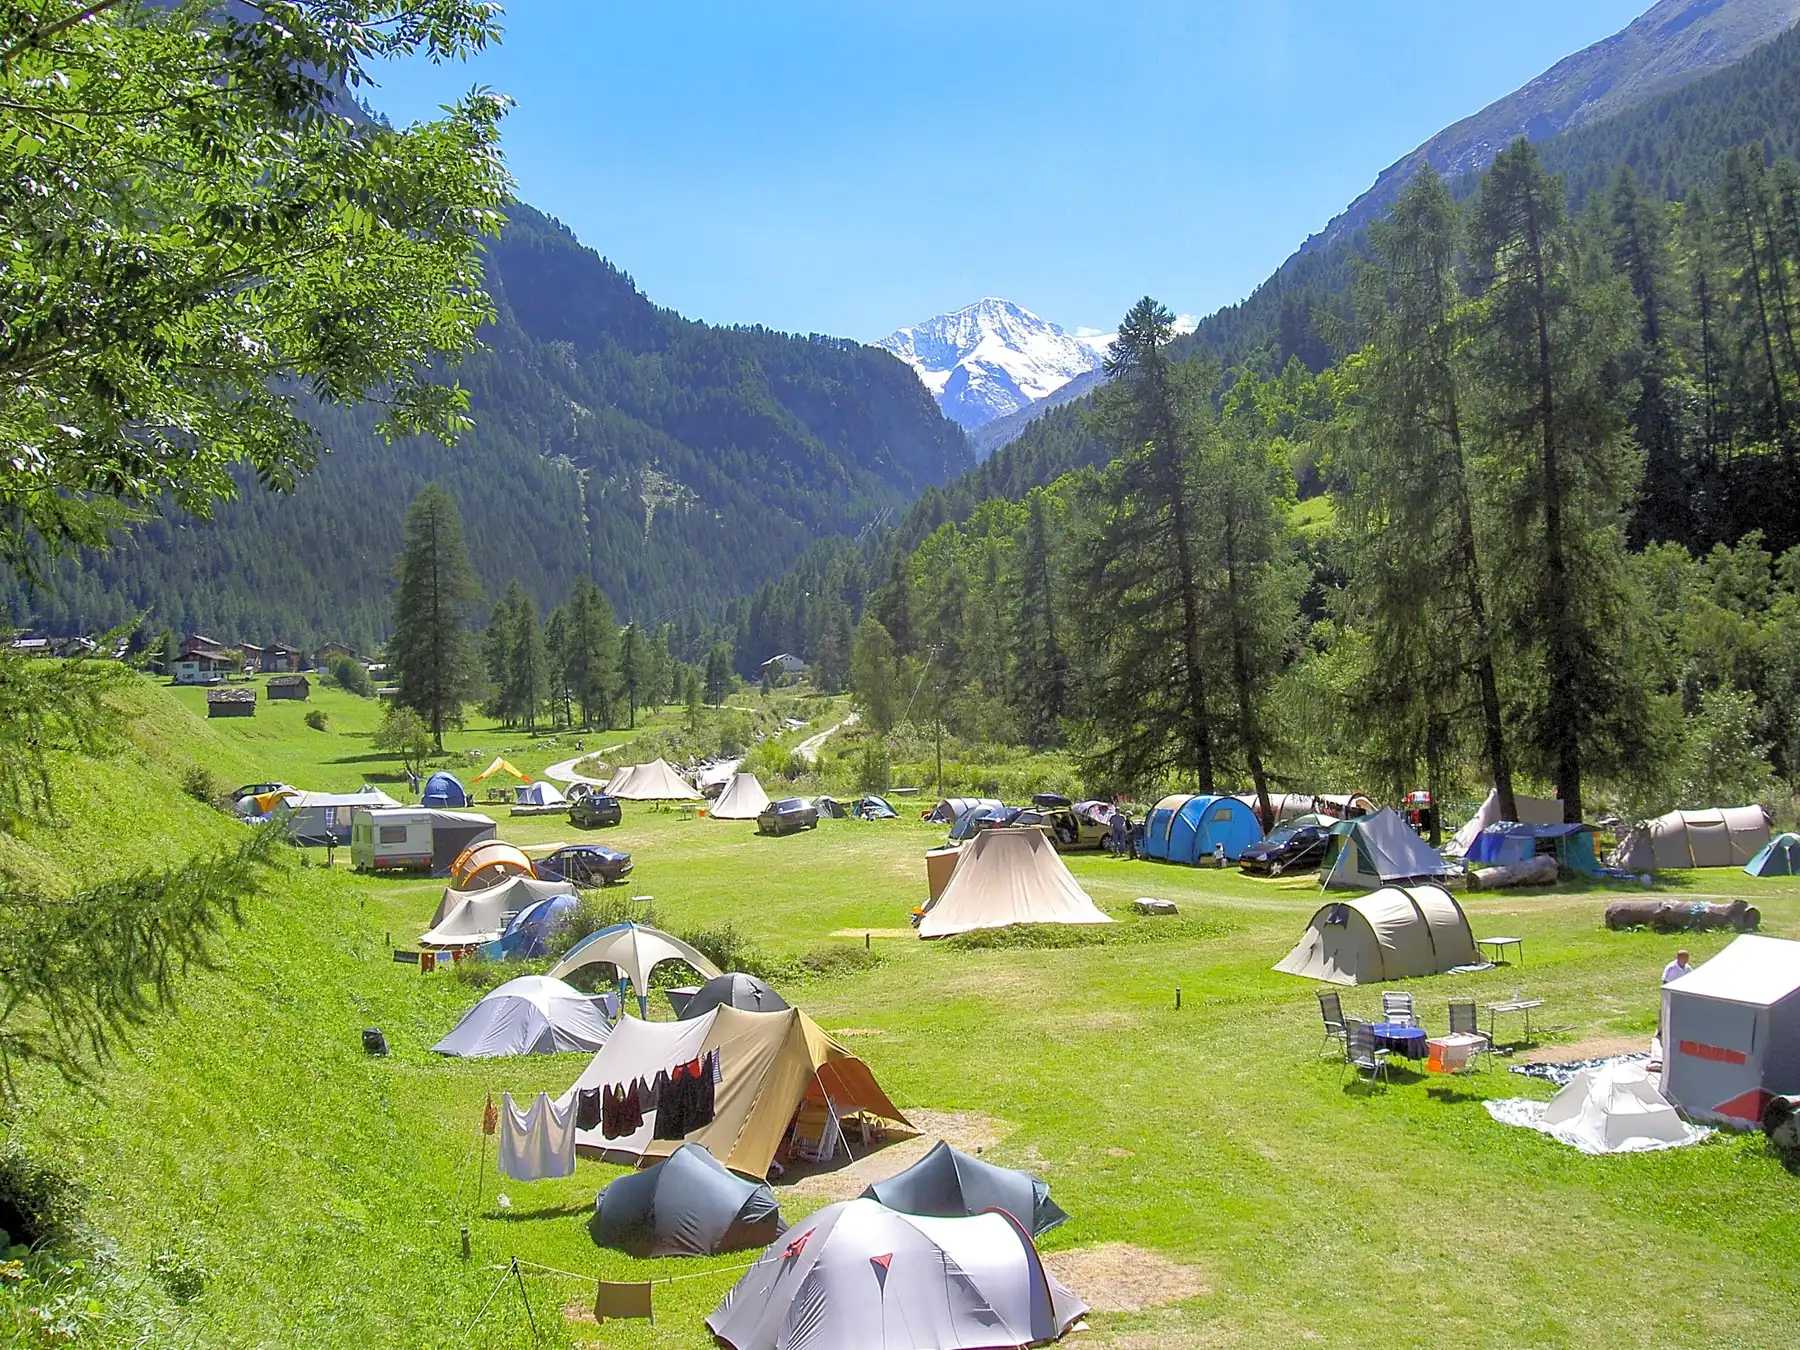 Setting the right price for your campsite is an important part of running the business